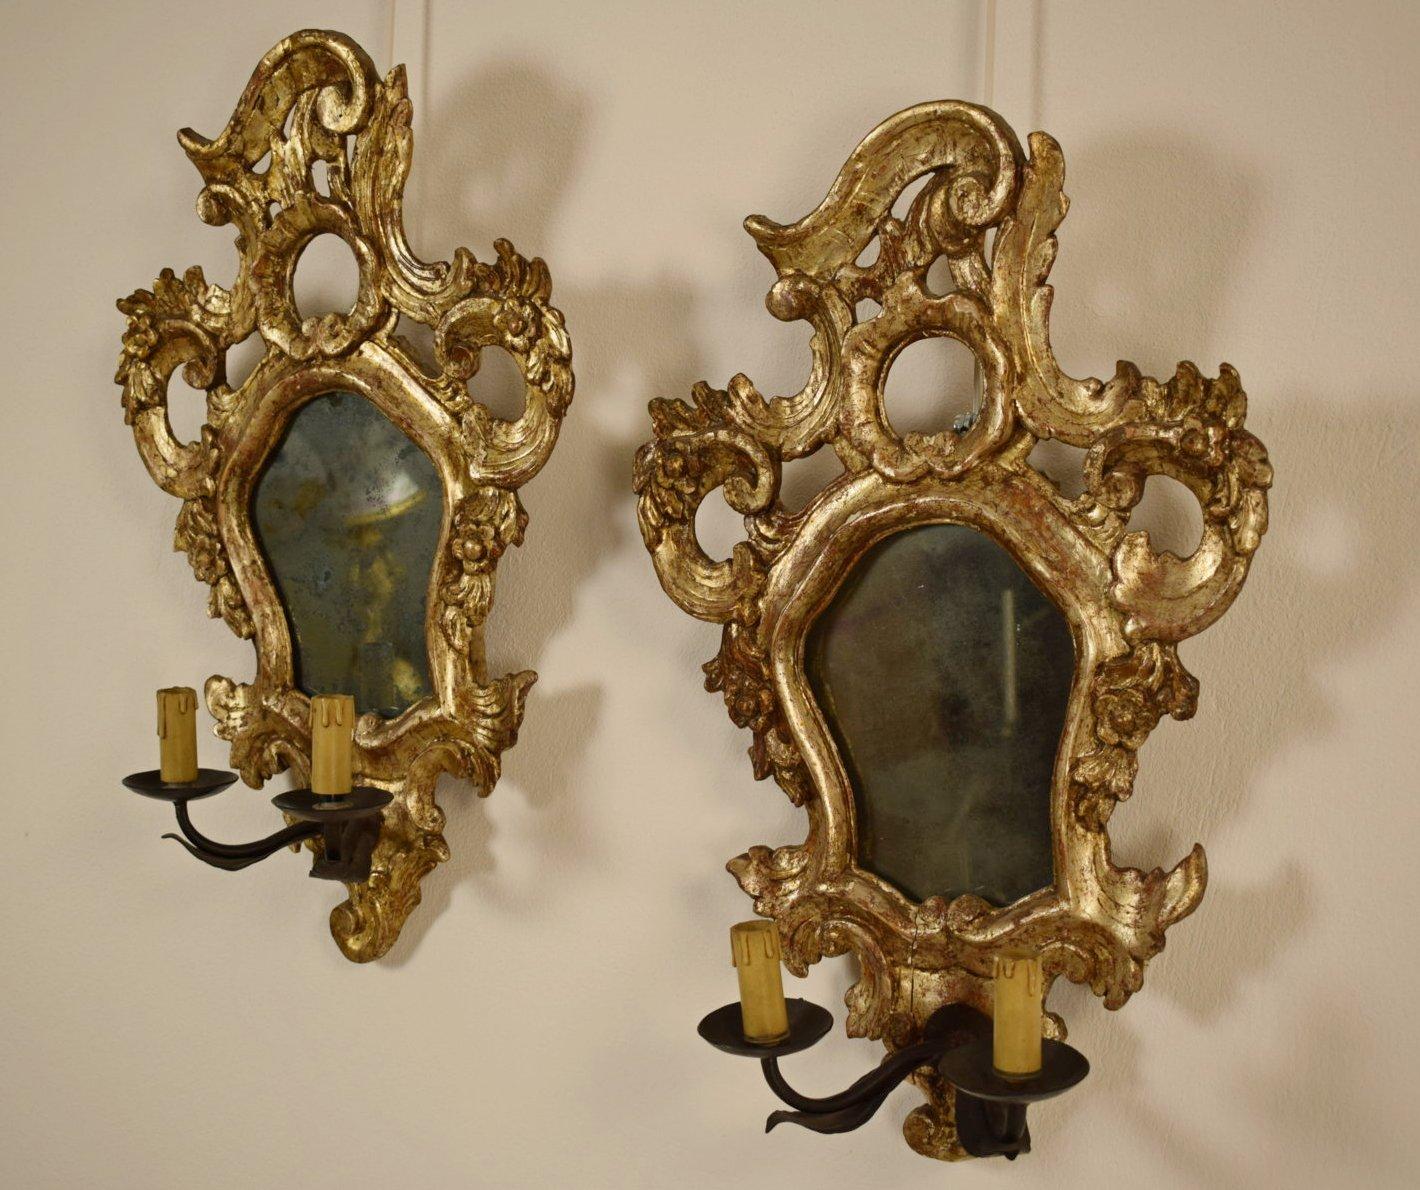 18th century, Mecca giltwood pair of Italian Louis XV candle wall sconce

Pair of Italian candle wall sconce in carved and gilded Mecca wood with mirror.
Louis XV period, mid-18th century

This pair of candle wall sconce, made circa mid-18th